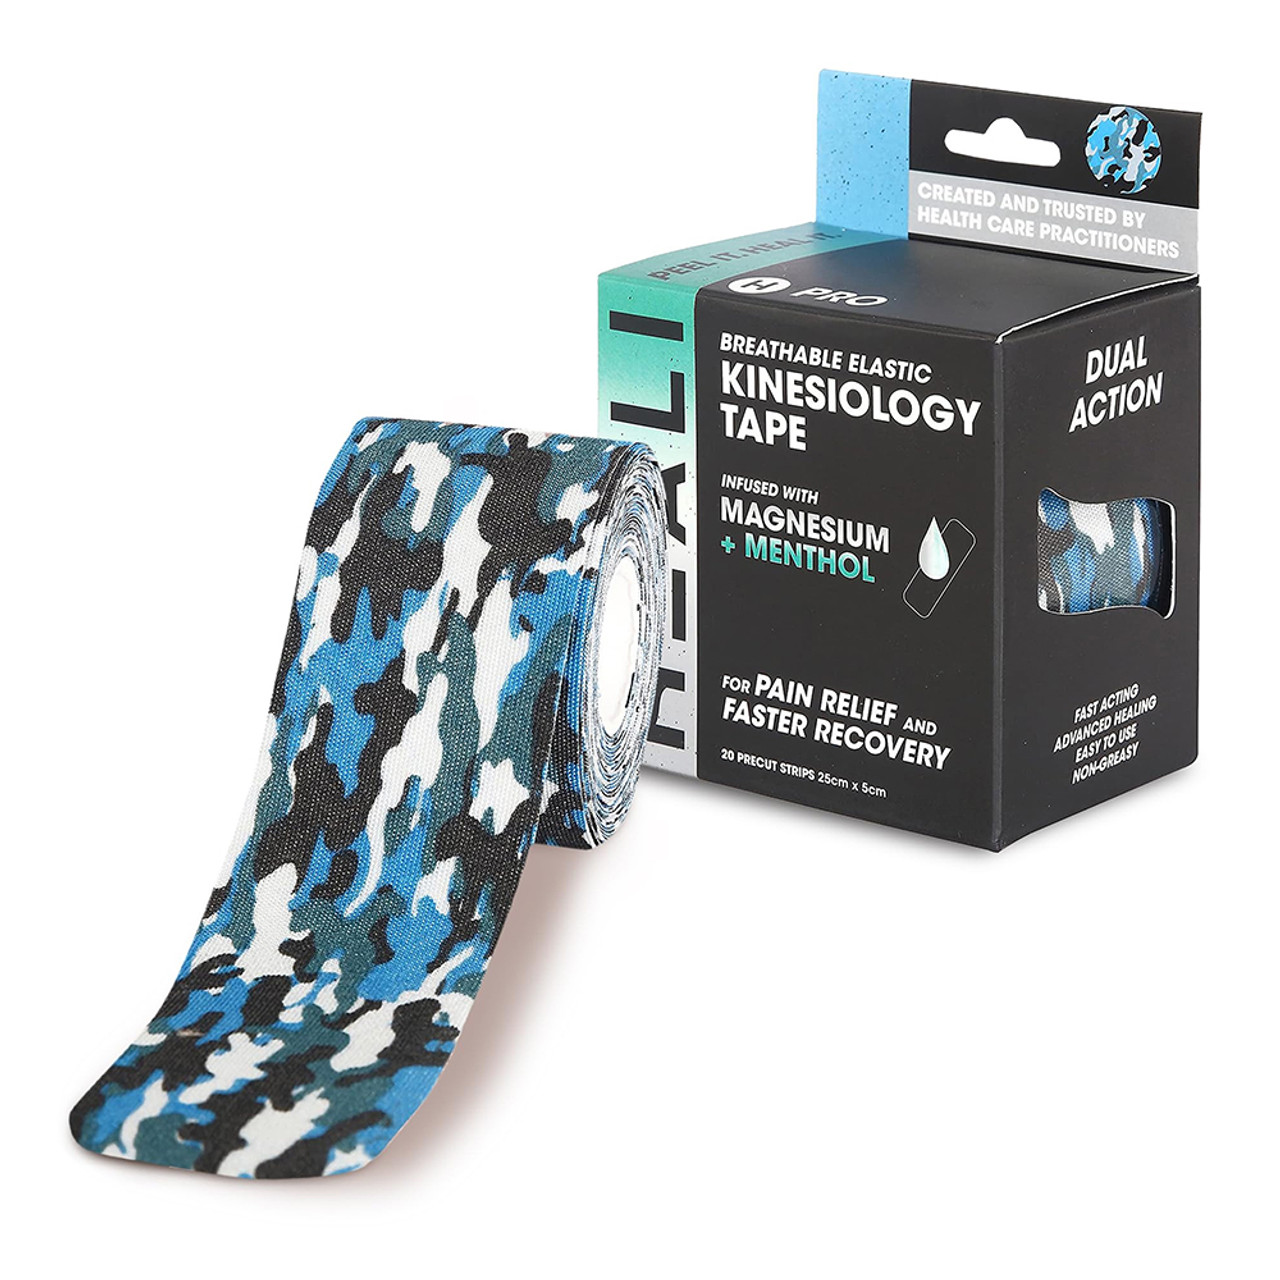 Heali Kinesiology Tape Infused with Magnesium and Menthol, Blue Camo, 1 Ea